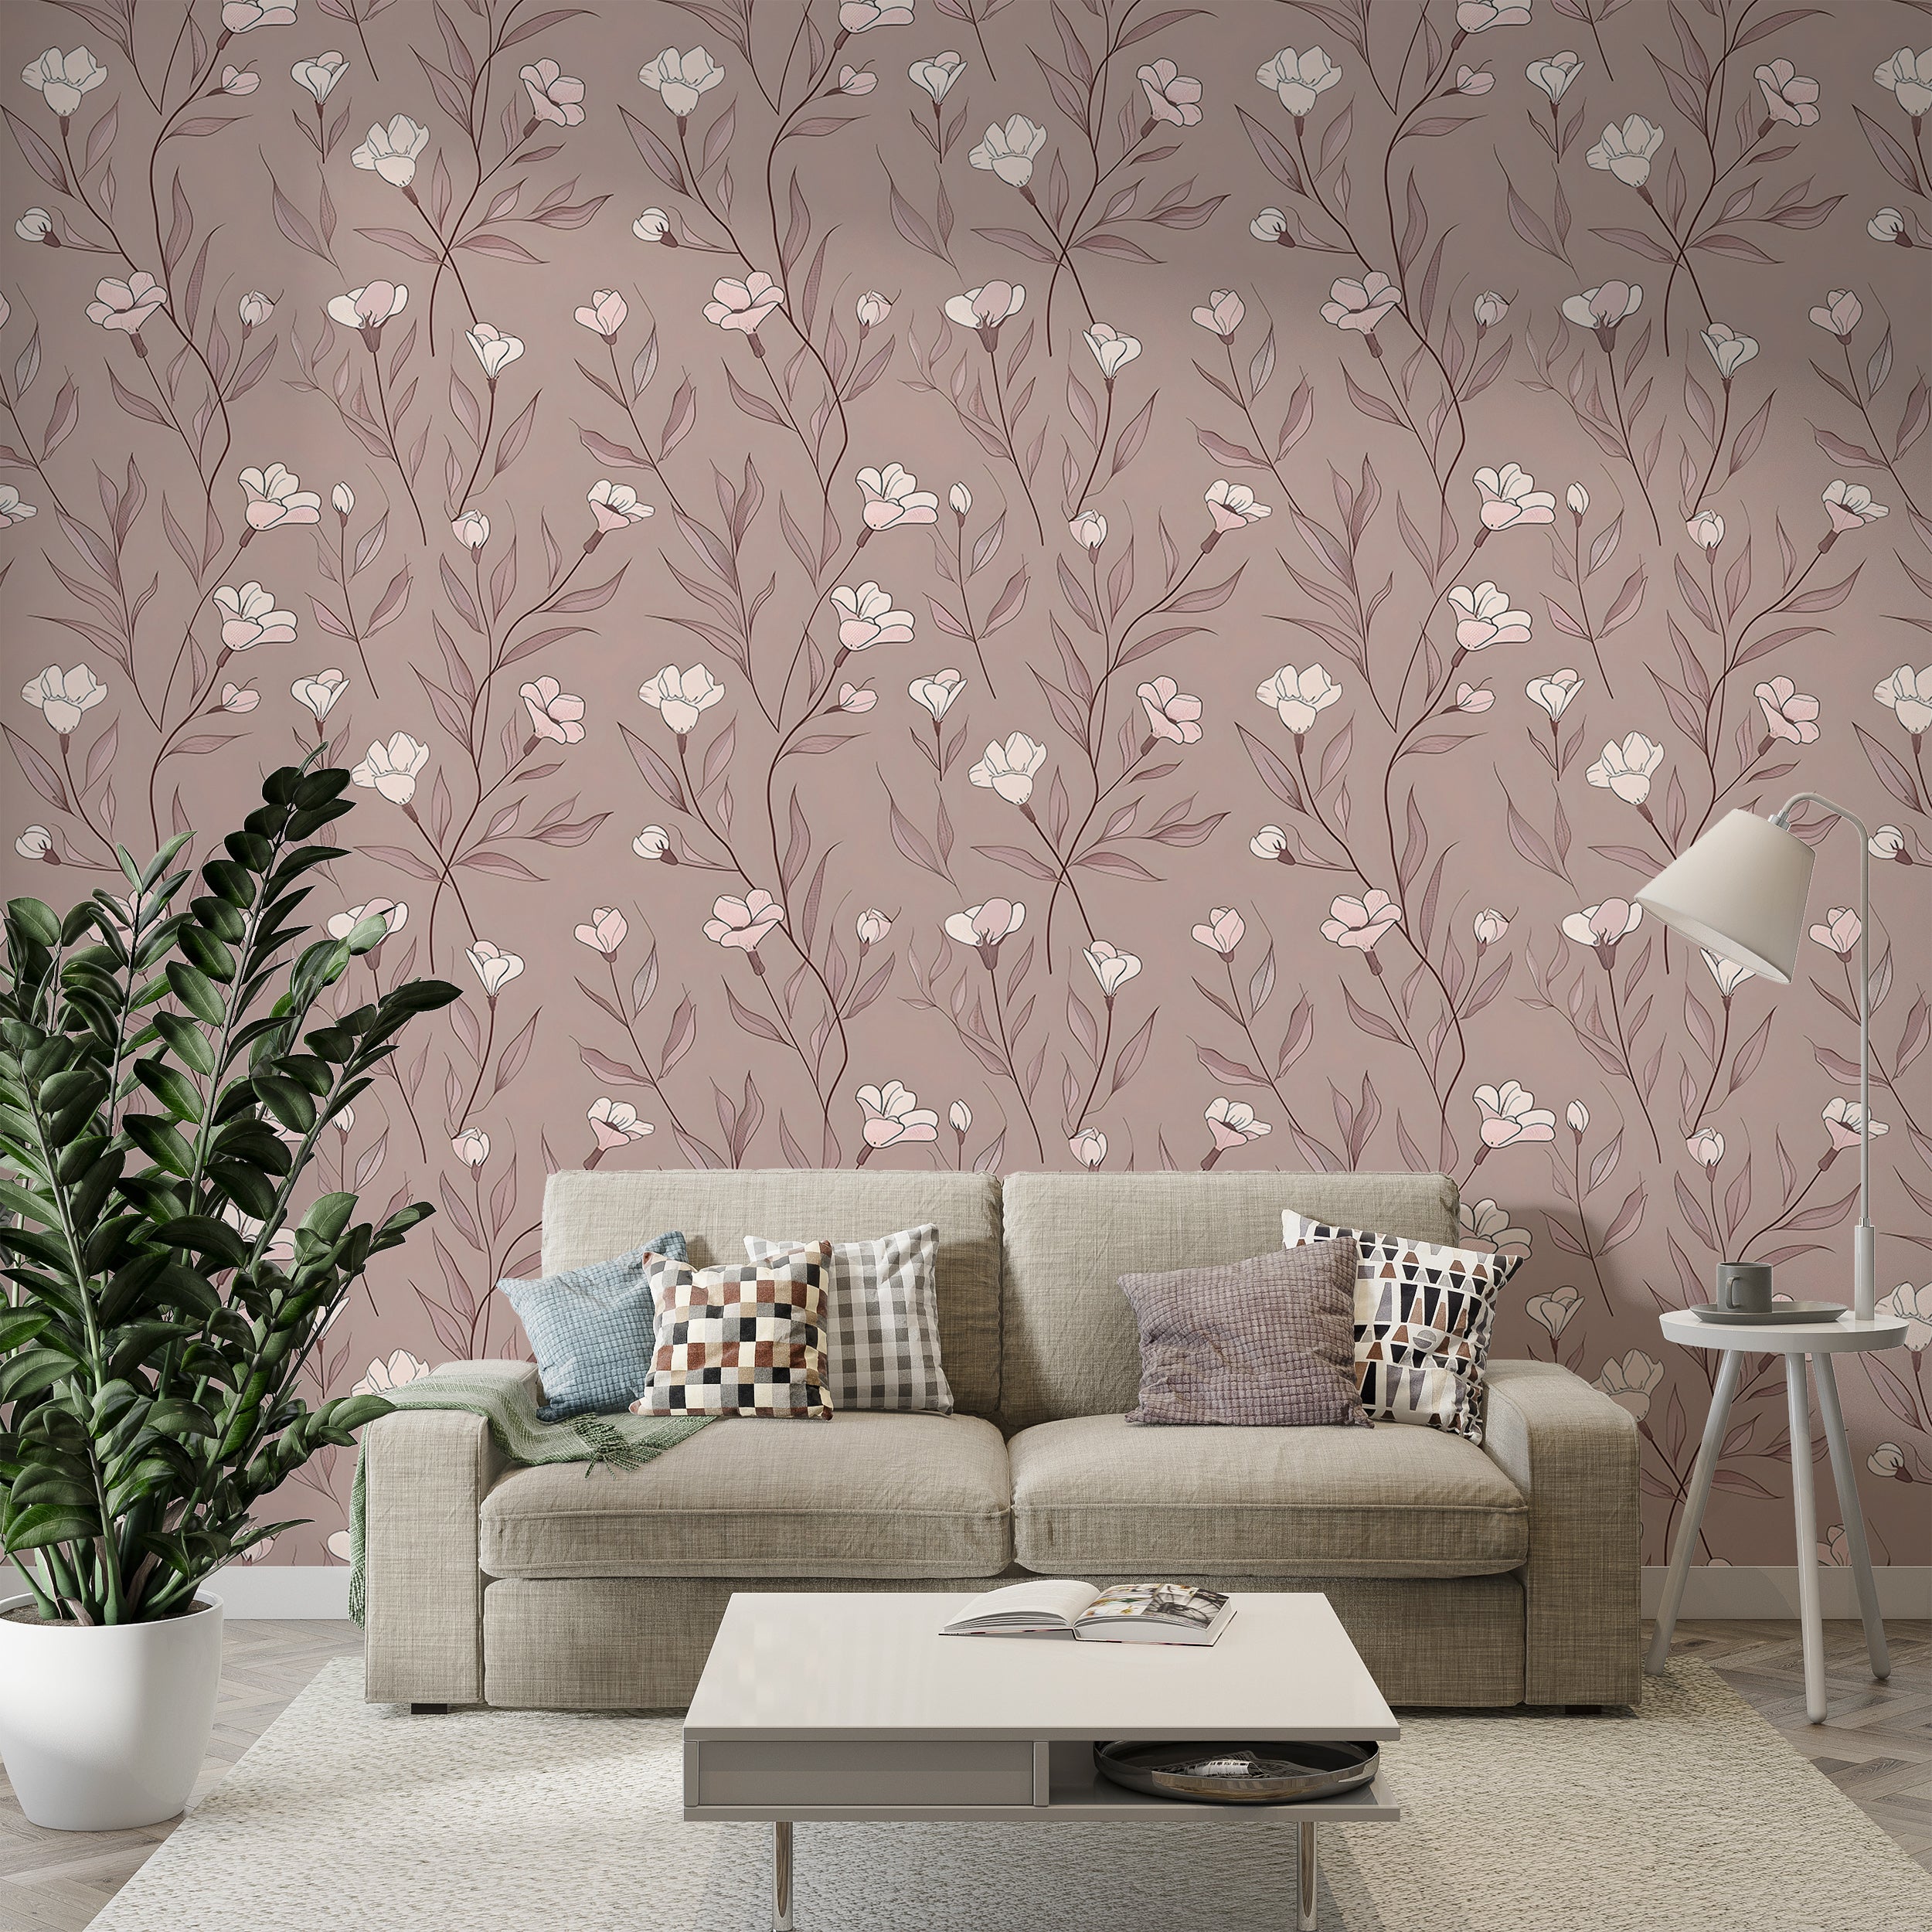 Minimalistic Dusty Rose Floral Wallpaper, Self-adhesive Meadow Flowers Wallpaper, Removable Pastel Pink and White Botanical Wall Decor